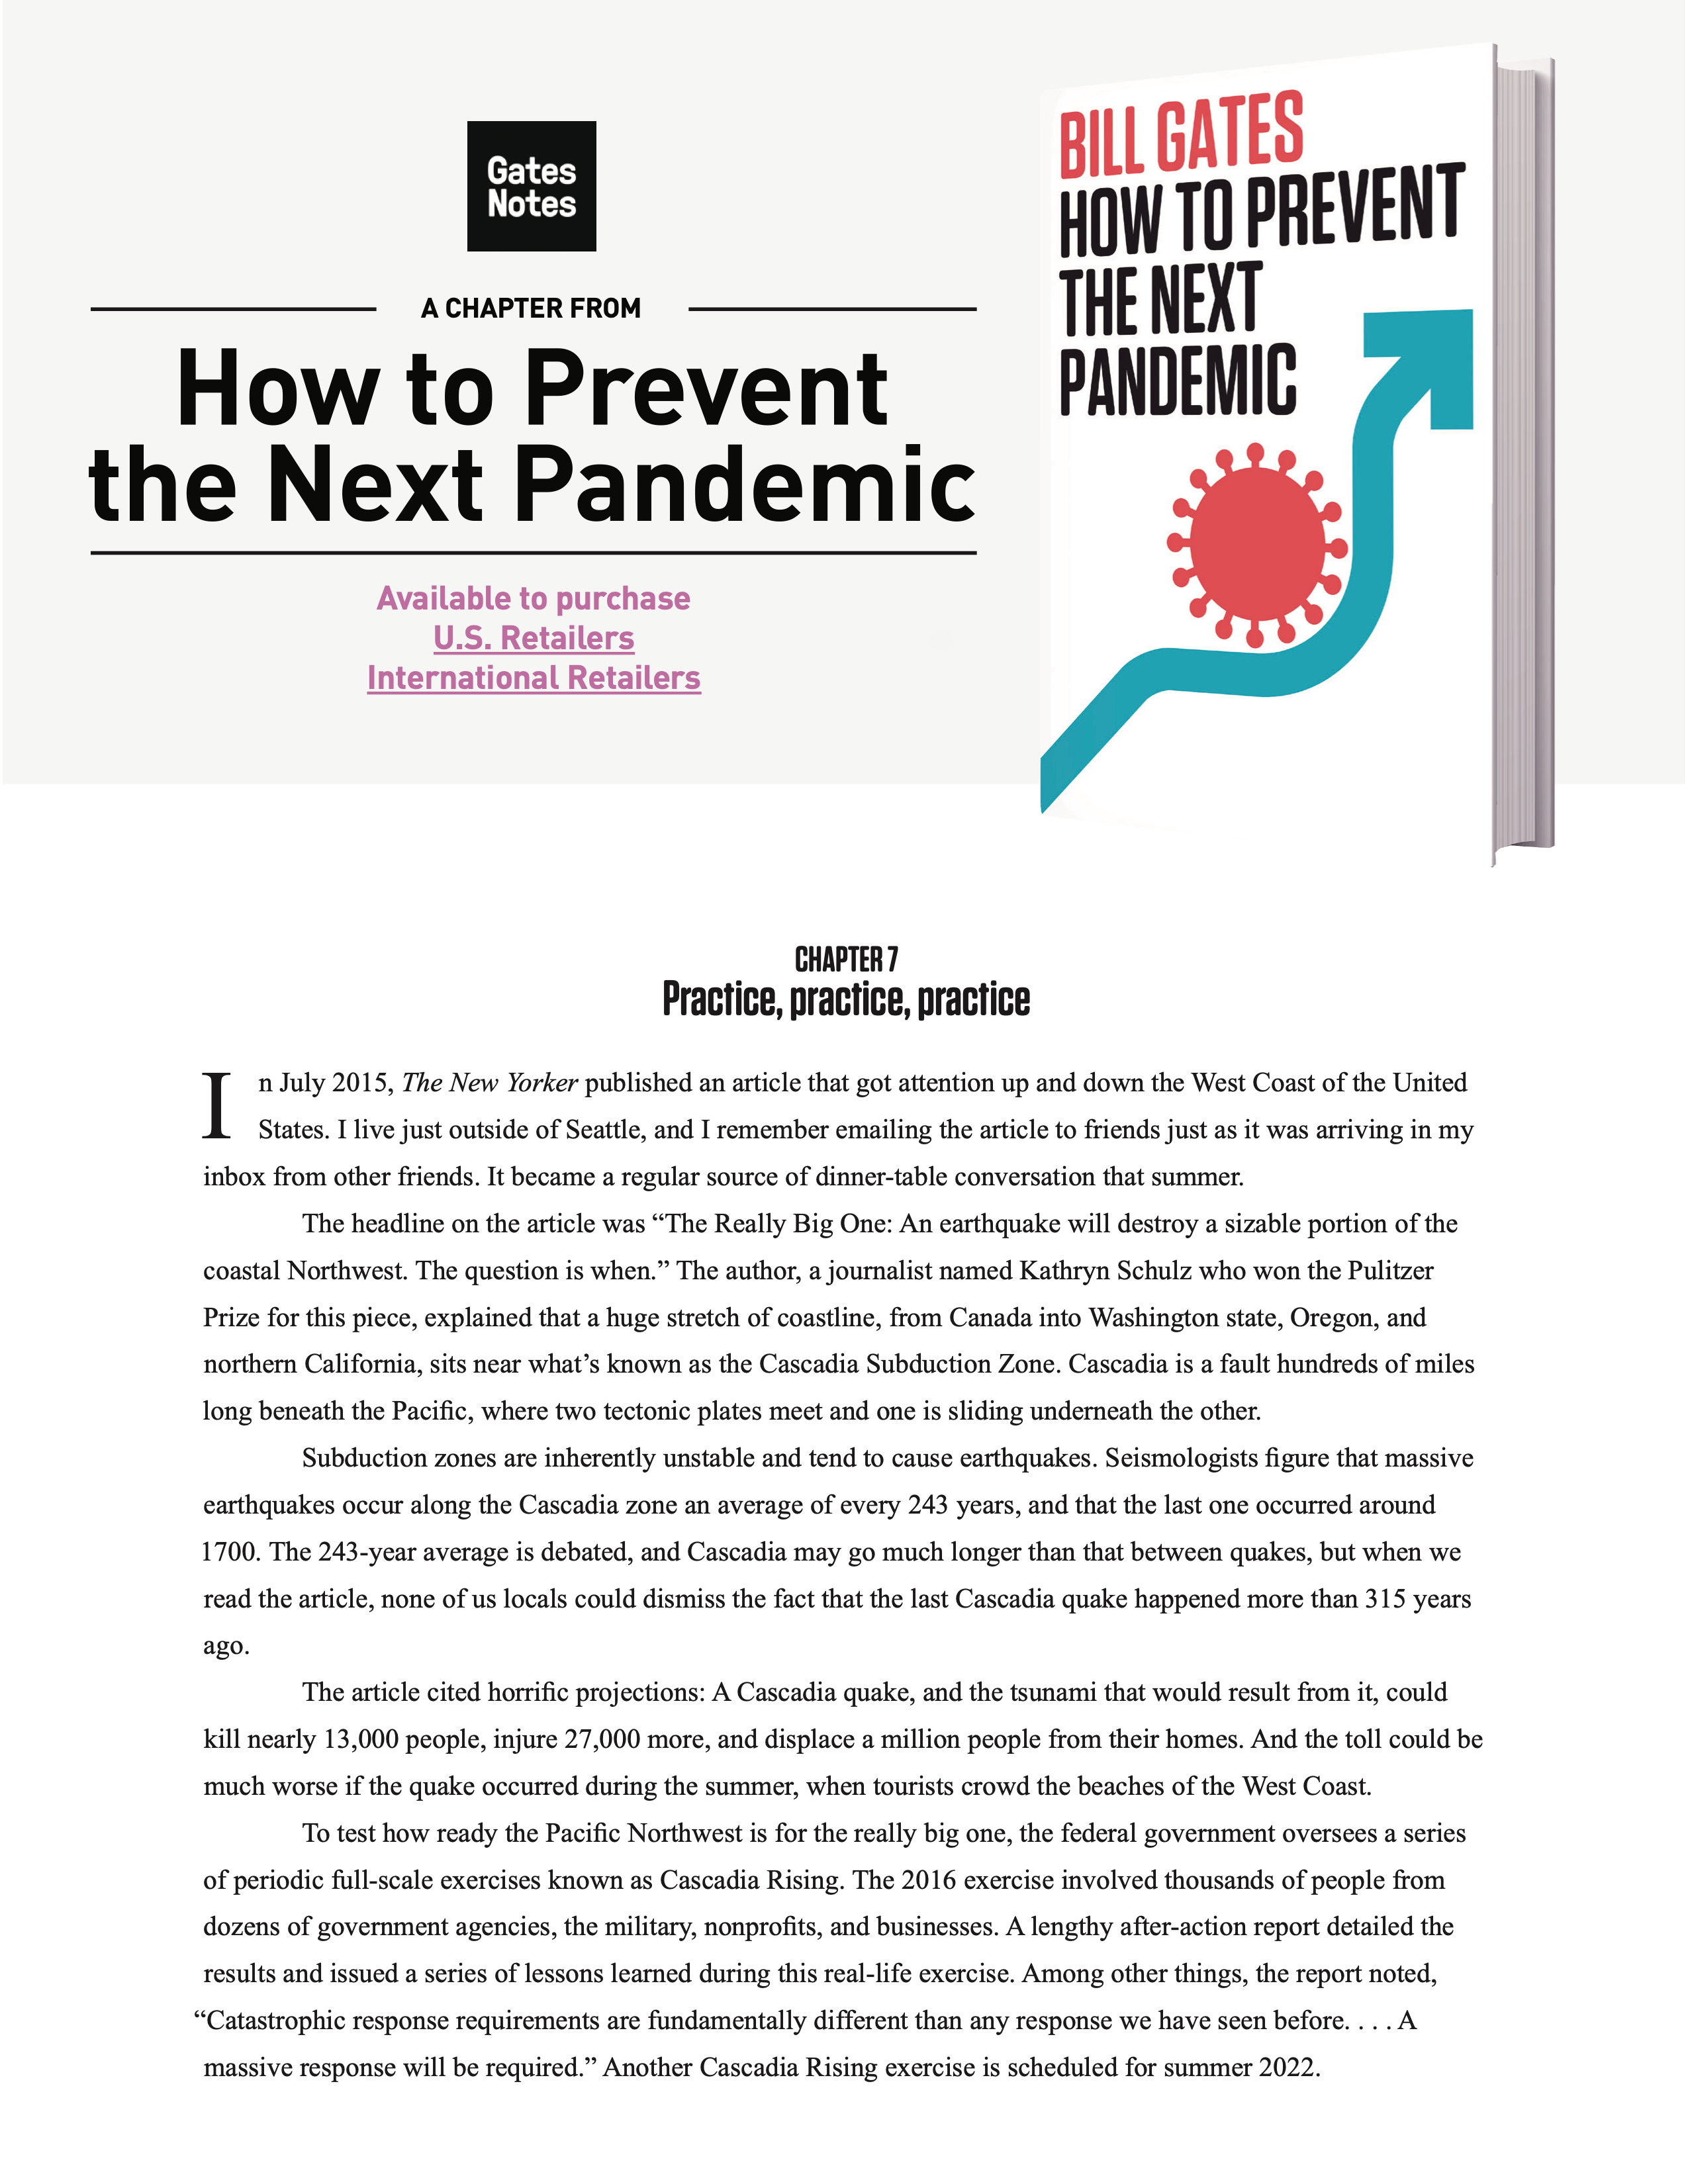 How to Prevent the Next Pandemic: Chapter 7